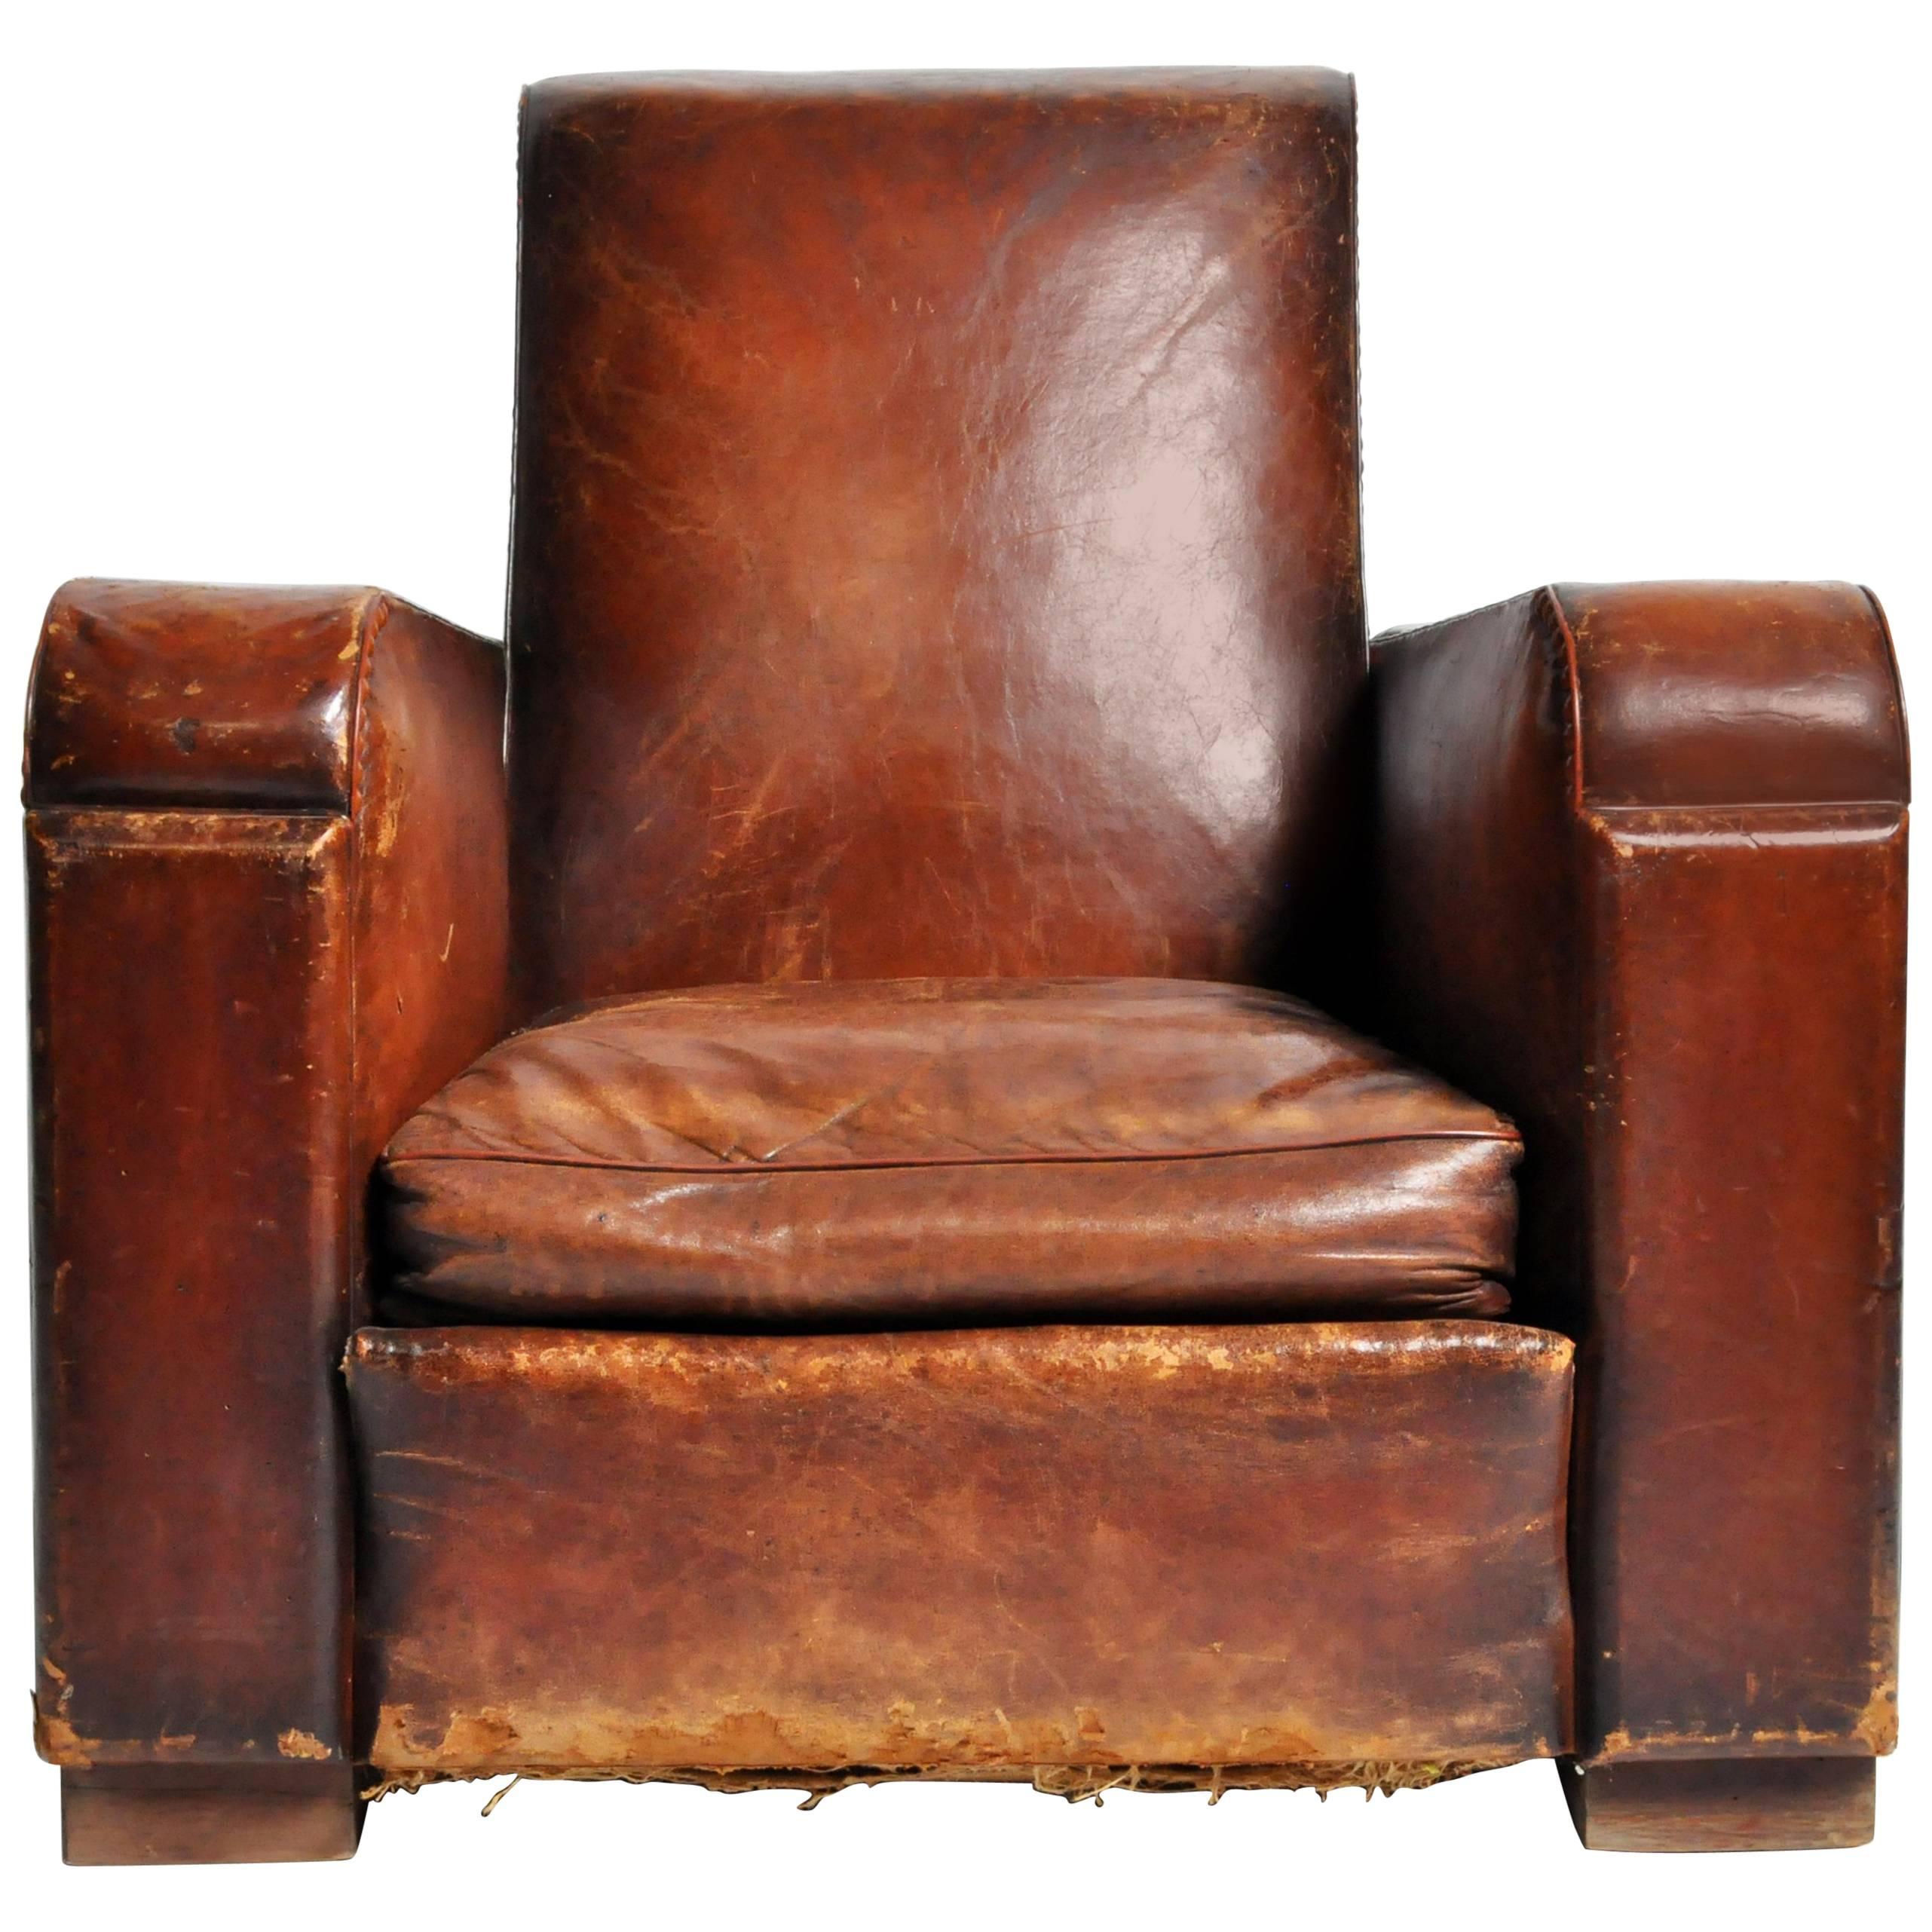 Art Deco French Leather Club Chair with Original Patina